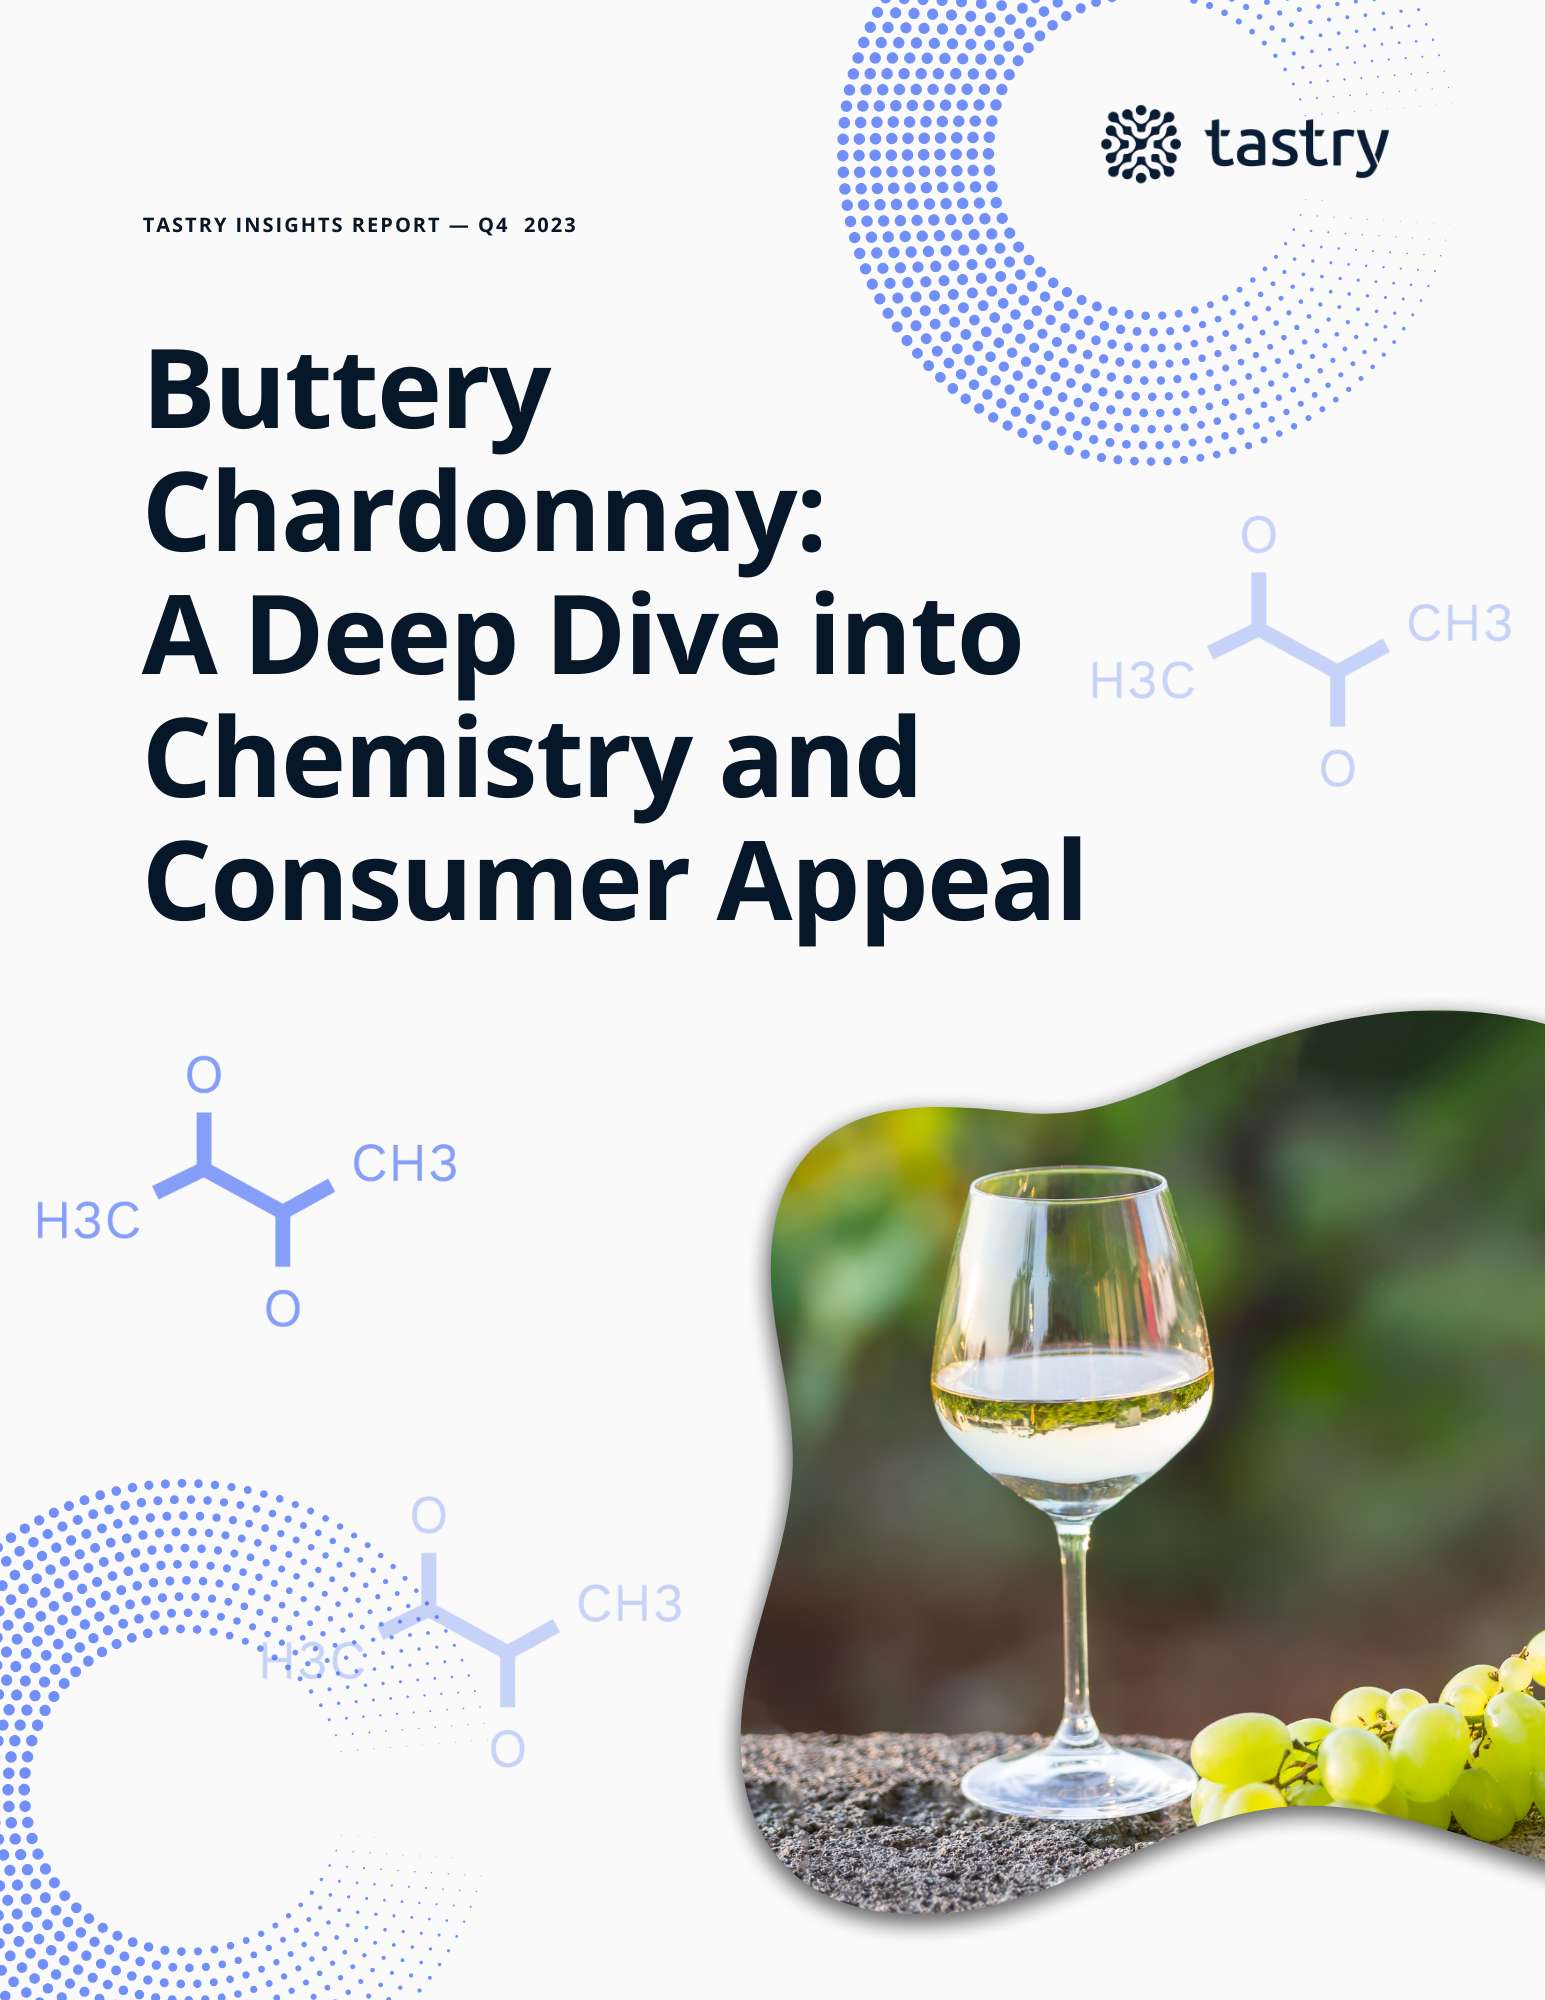 Buttery Chardonnay: A Deep Dive into Chemistry and Consumer Appeal